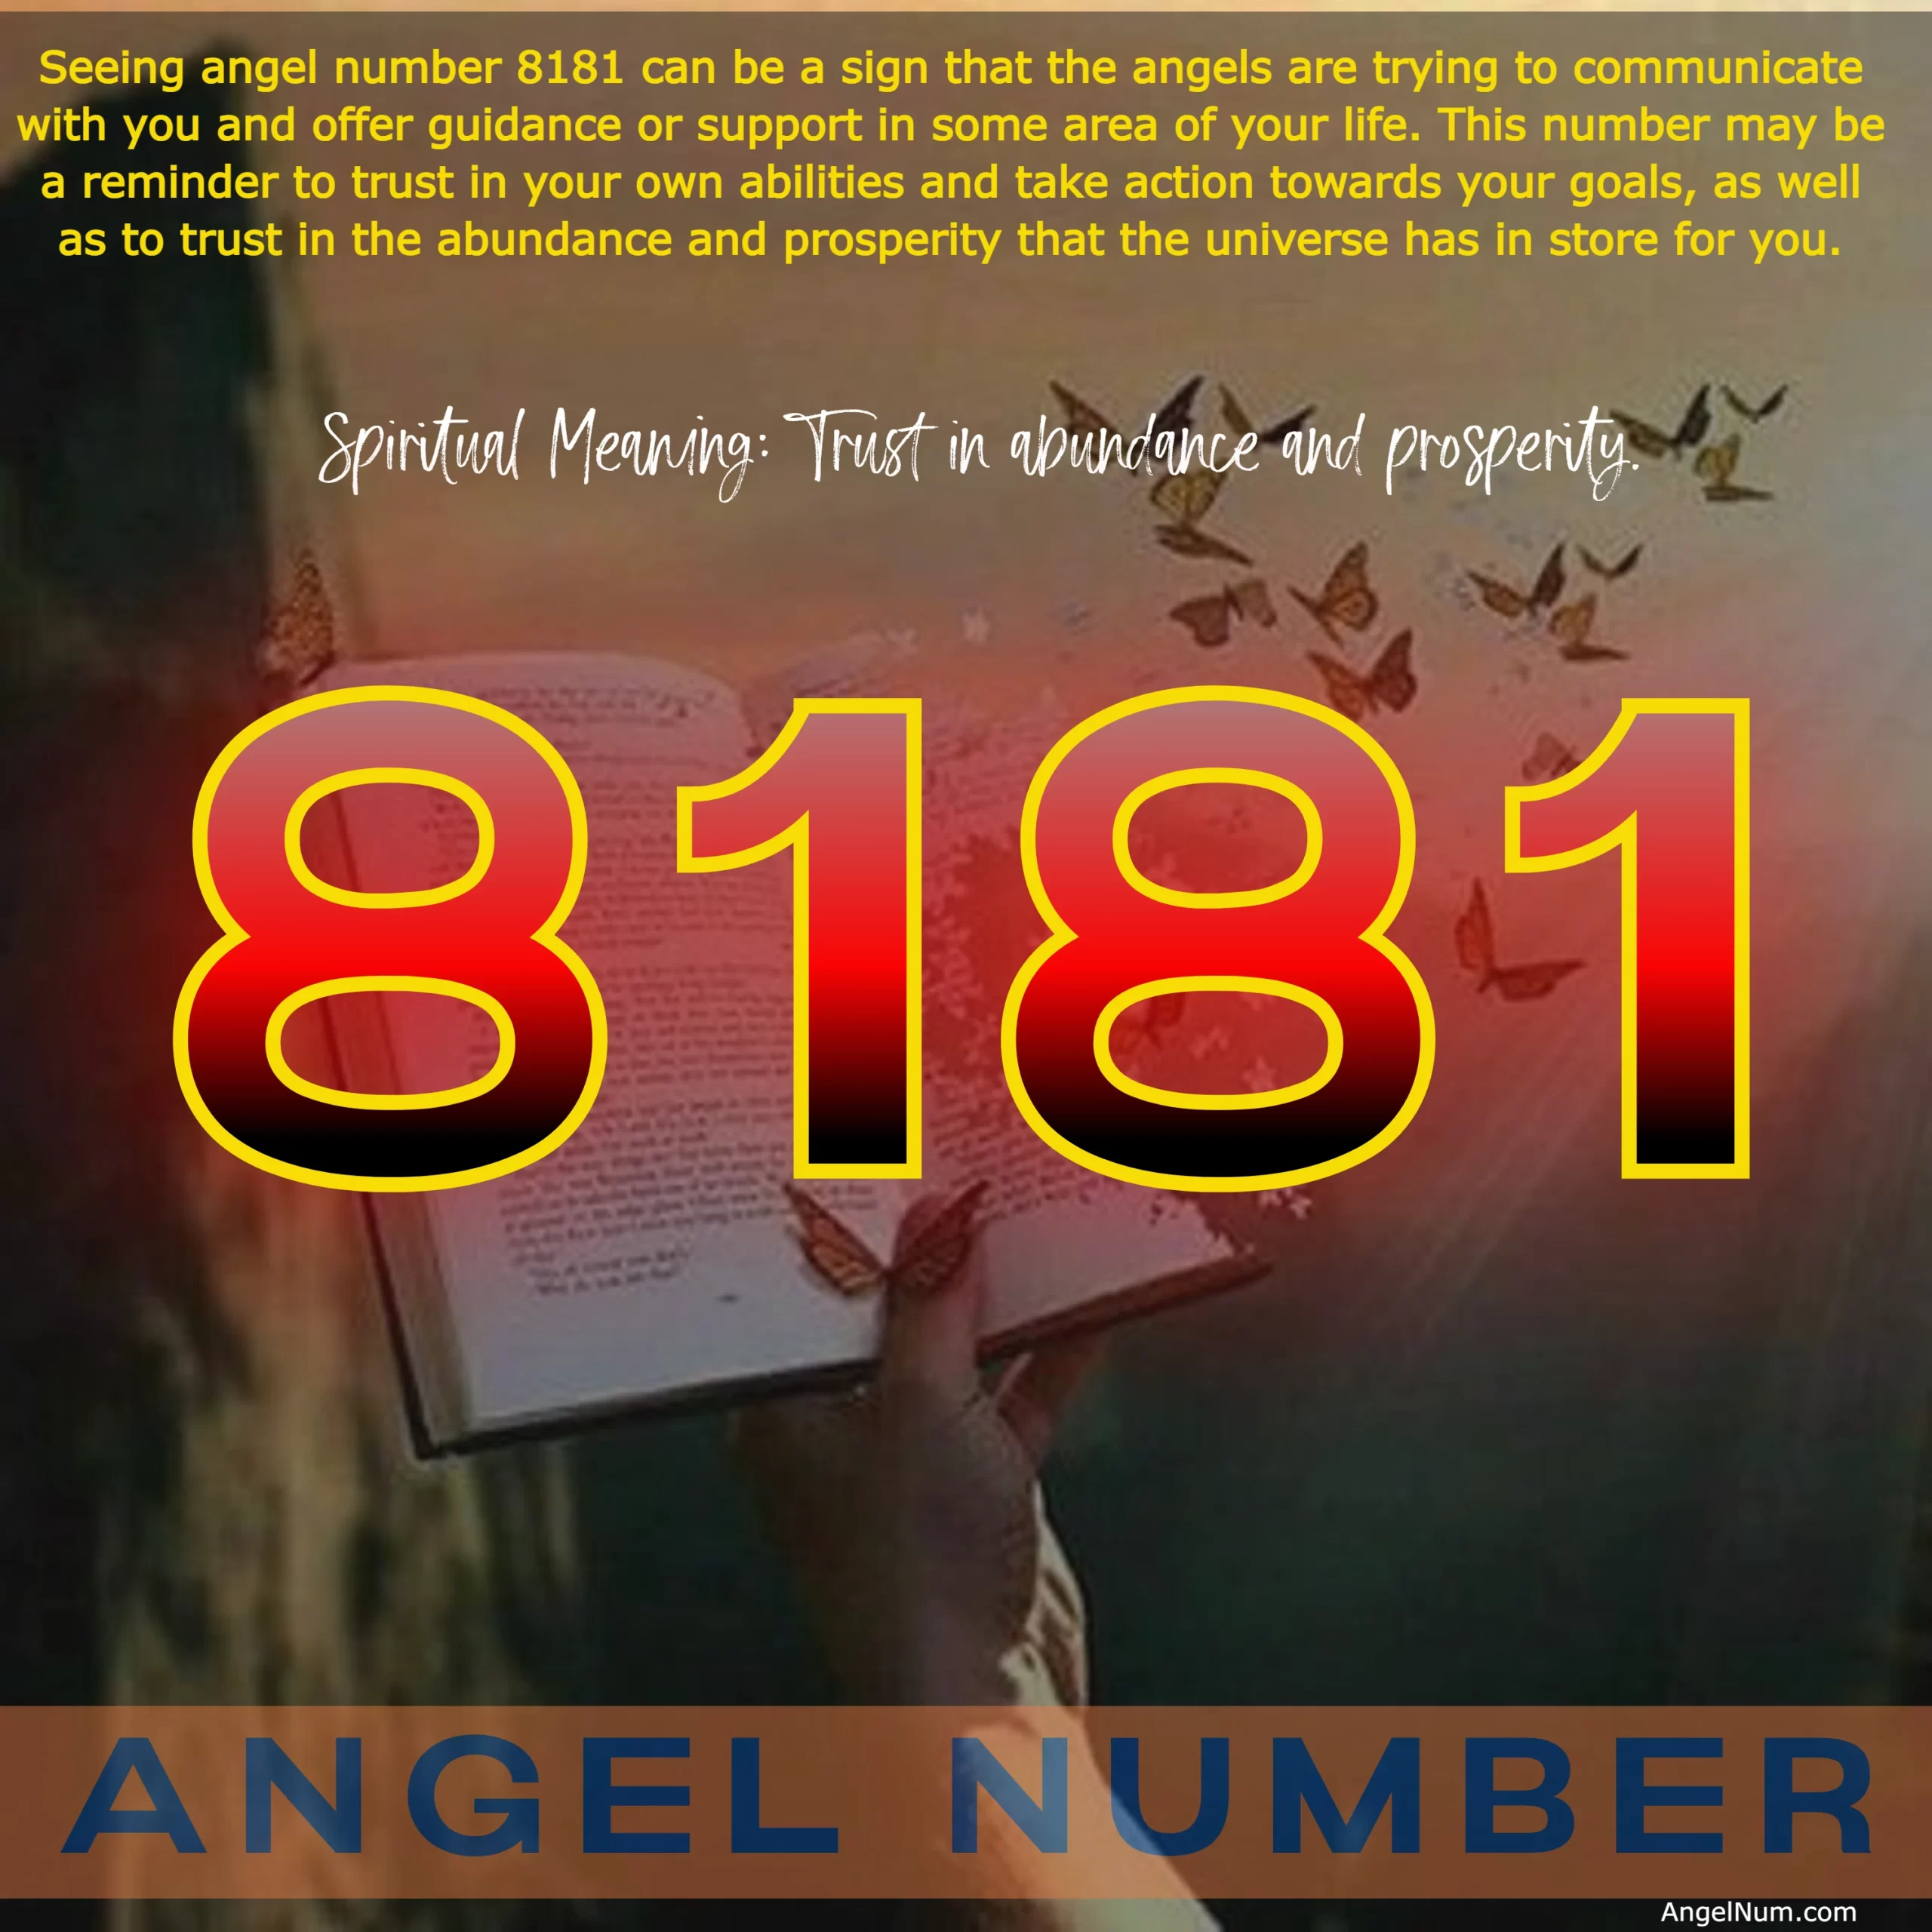 Angel Number 8181: Meaning, Symbolism, and Spiritual Guidance